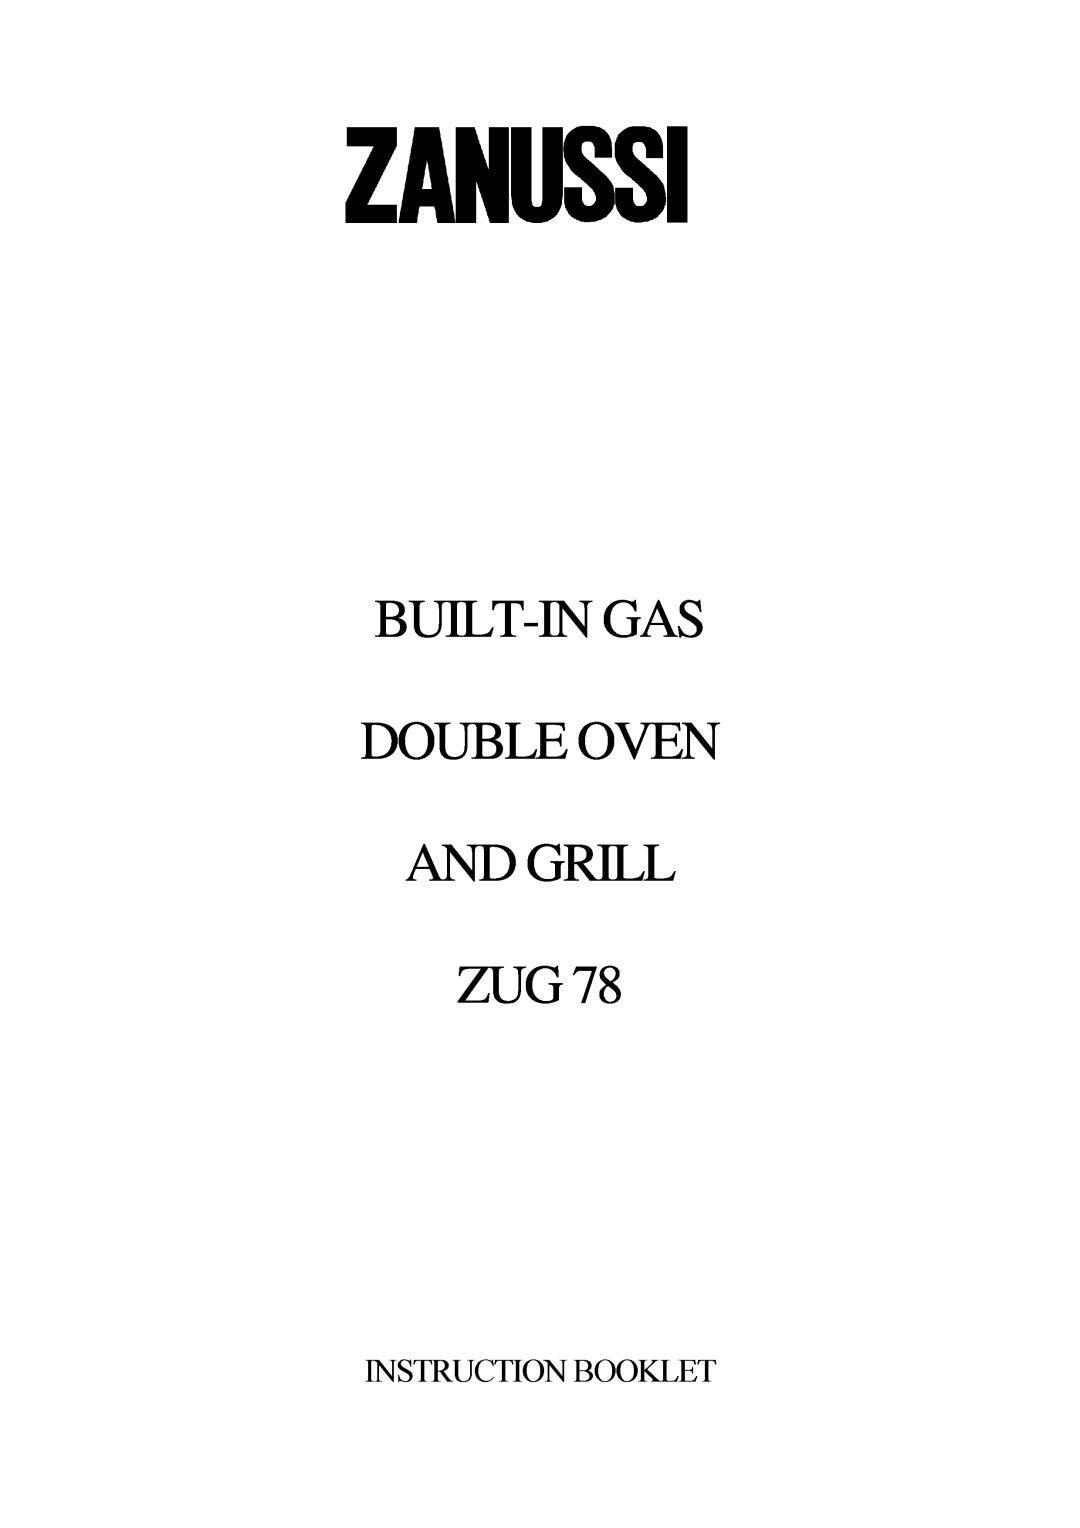 Zanussi manual INSTRUCTIONZUG 78BOOKLET, Built-Ingas Double Oven And Grill 